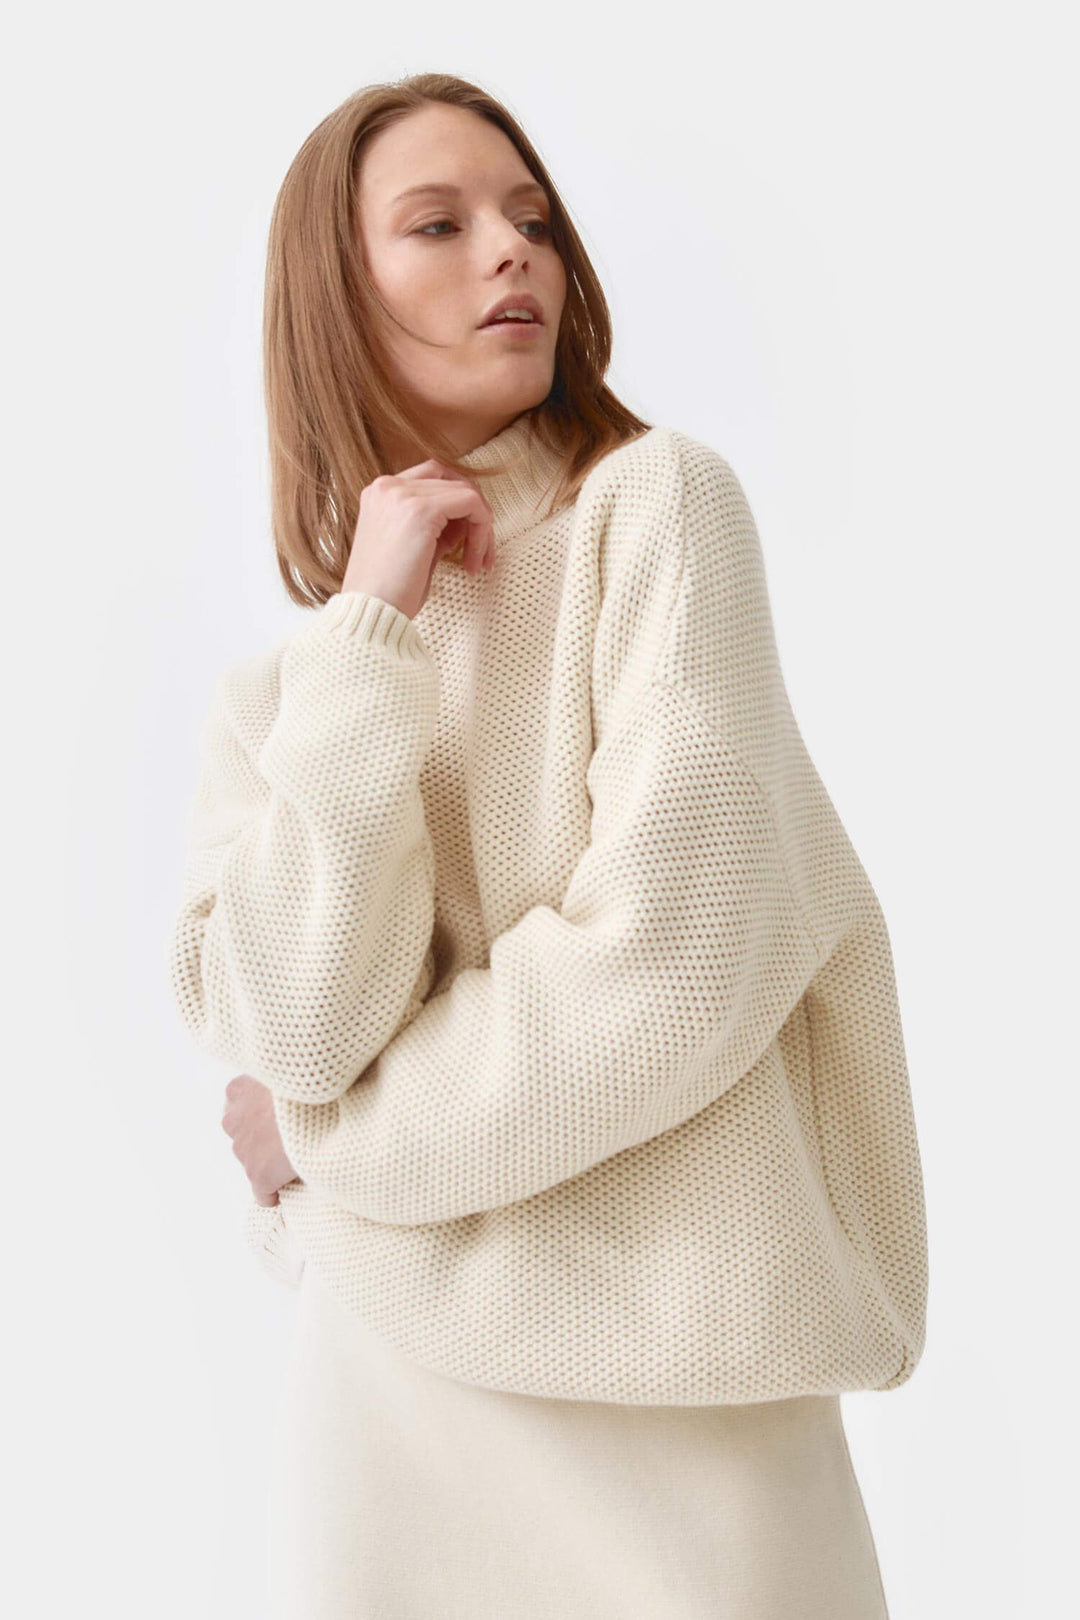 Knitted honeycomb pullover